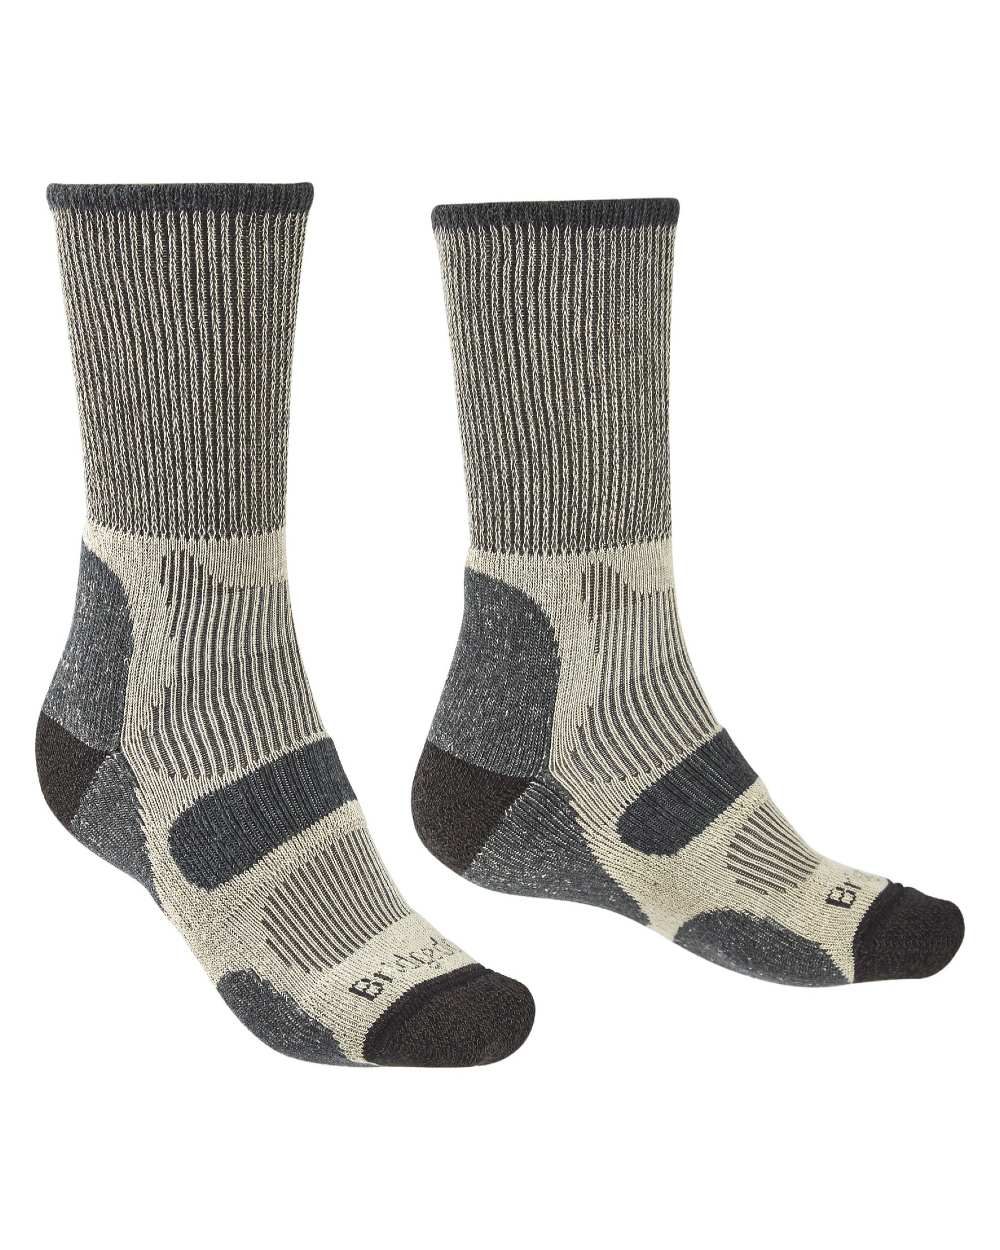 Charcoal coloured Bridgedale Hike Lightweight Cotton Cool Socks on white background 